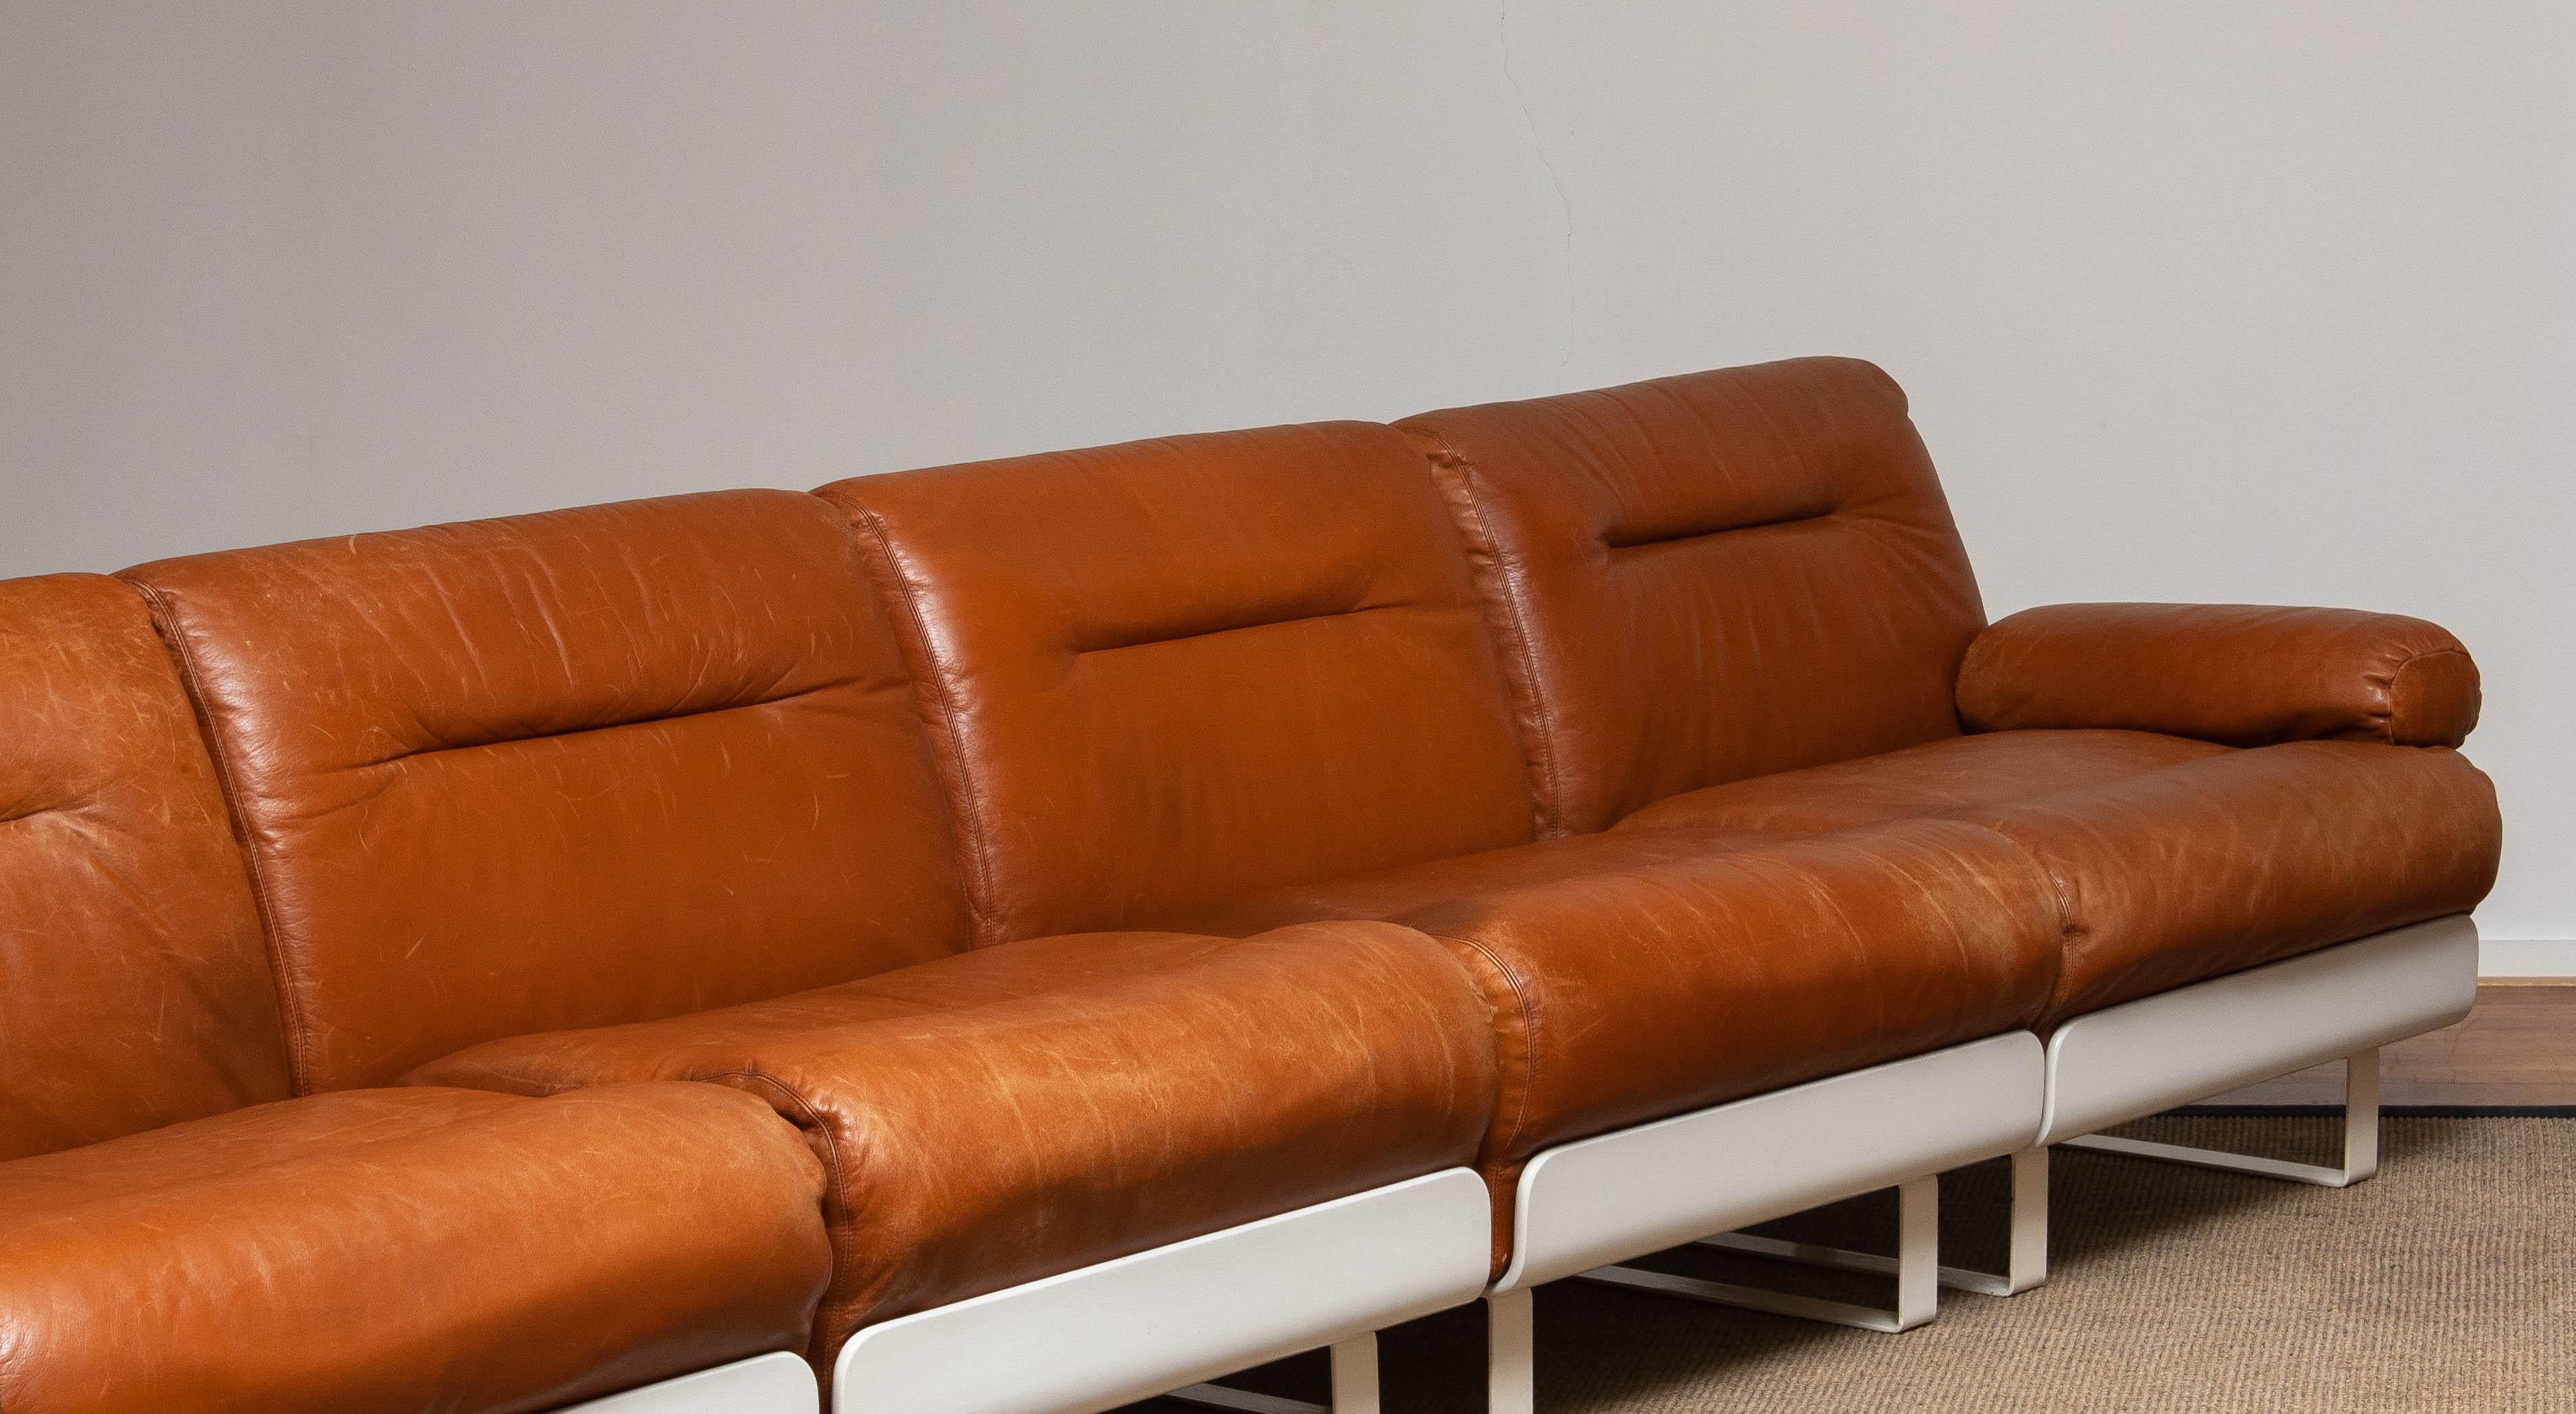 '70s Tan / Cognac Leather Sectional Sofa / Club Chairs by Luici Colani for COR 2